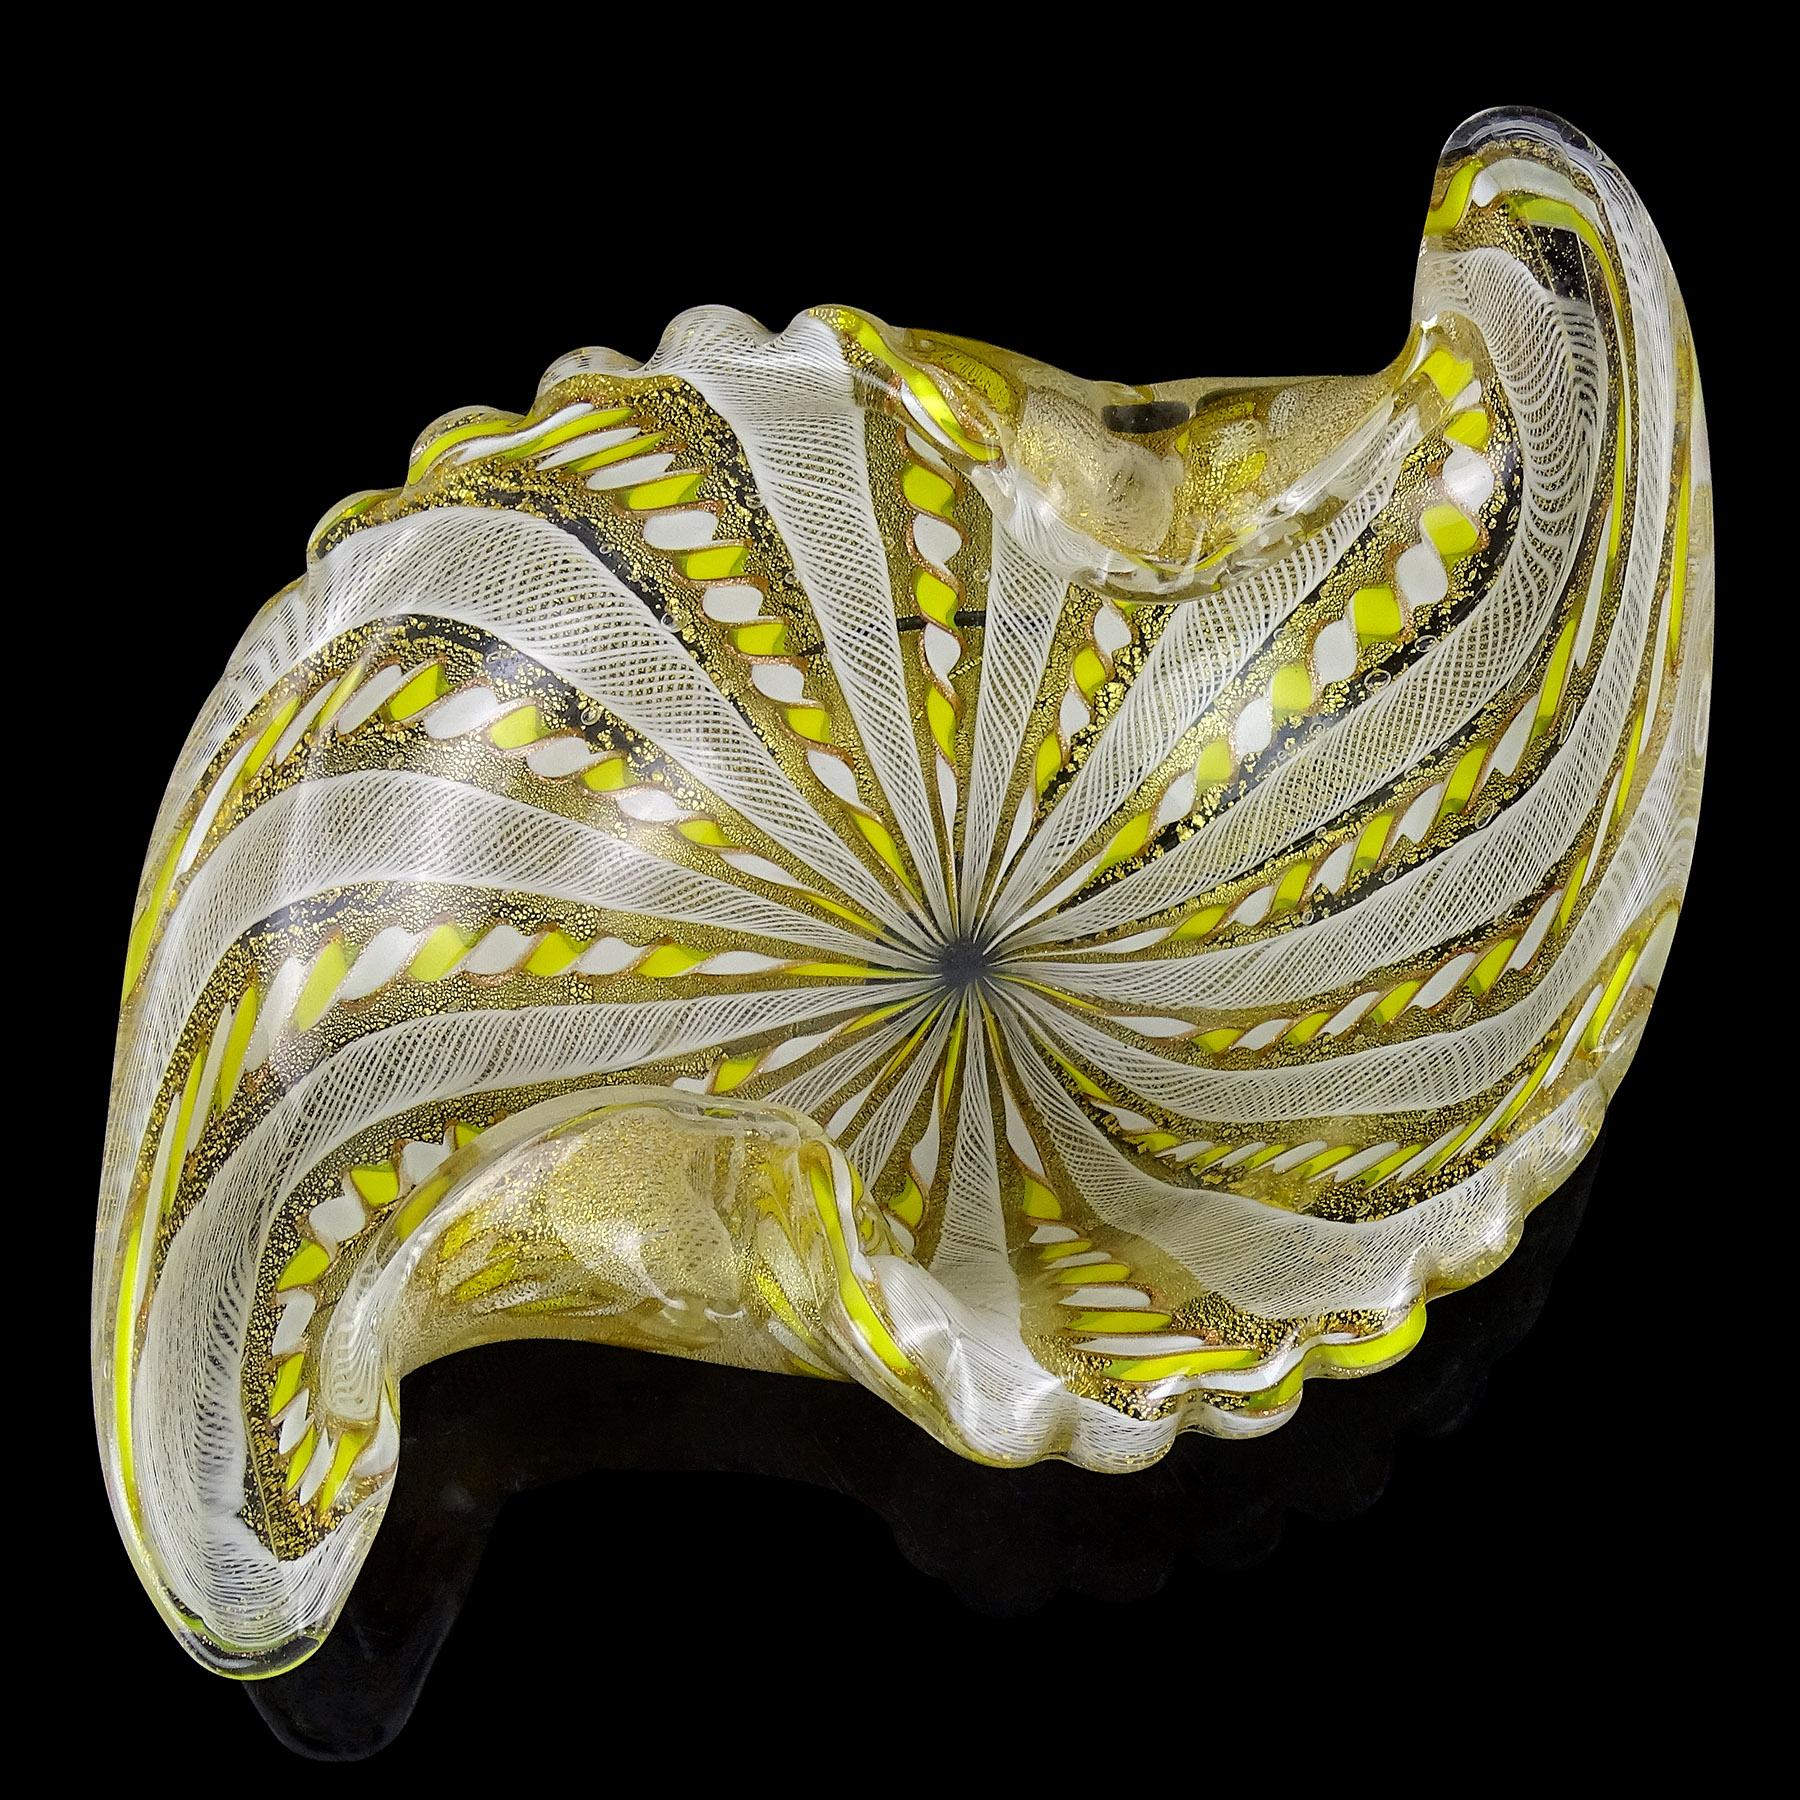 Beautiful, vintage Murano hand blown yellow, white and gold flecks Italian art glass center piece bowl. Documented to the Fratelli Toso company. The bowl has a scalloped rim, with 2 decorative folds and pulled sides in a unique shape. It has white